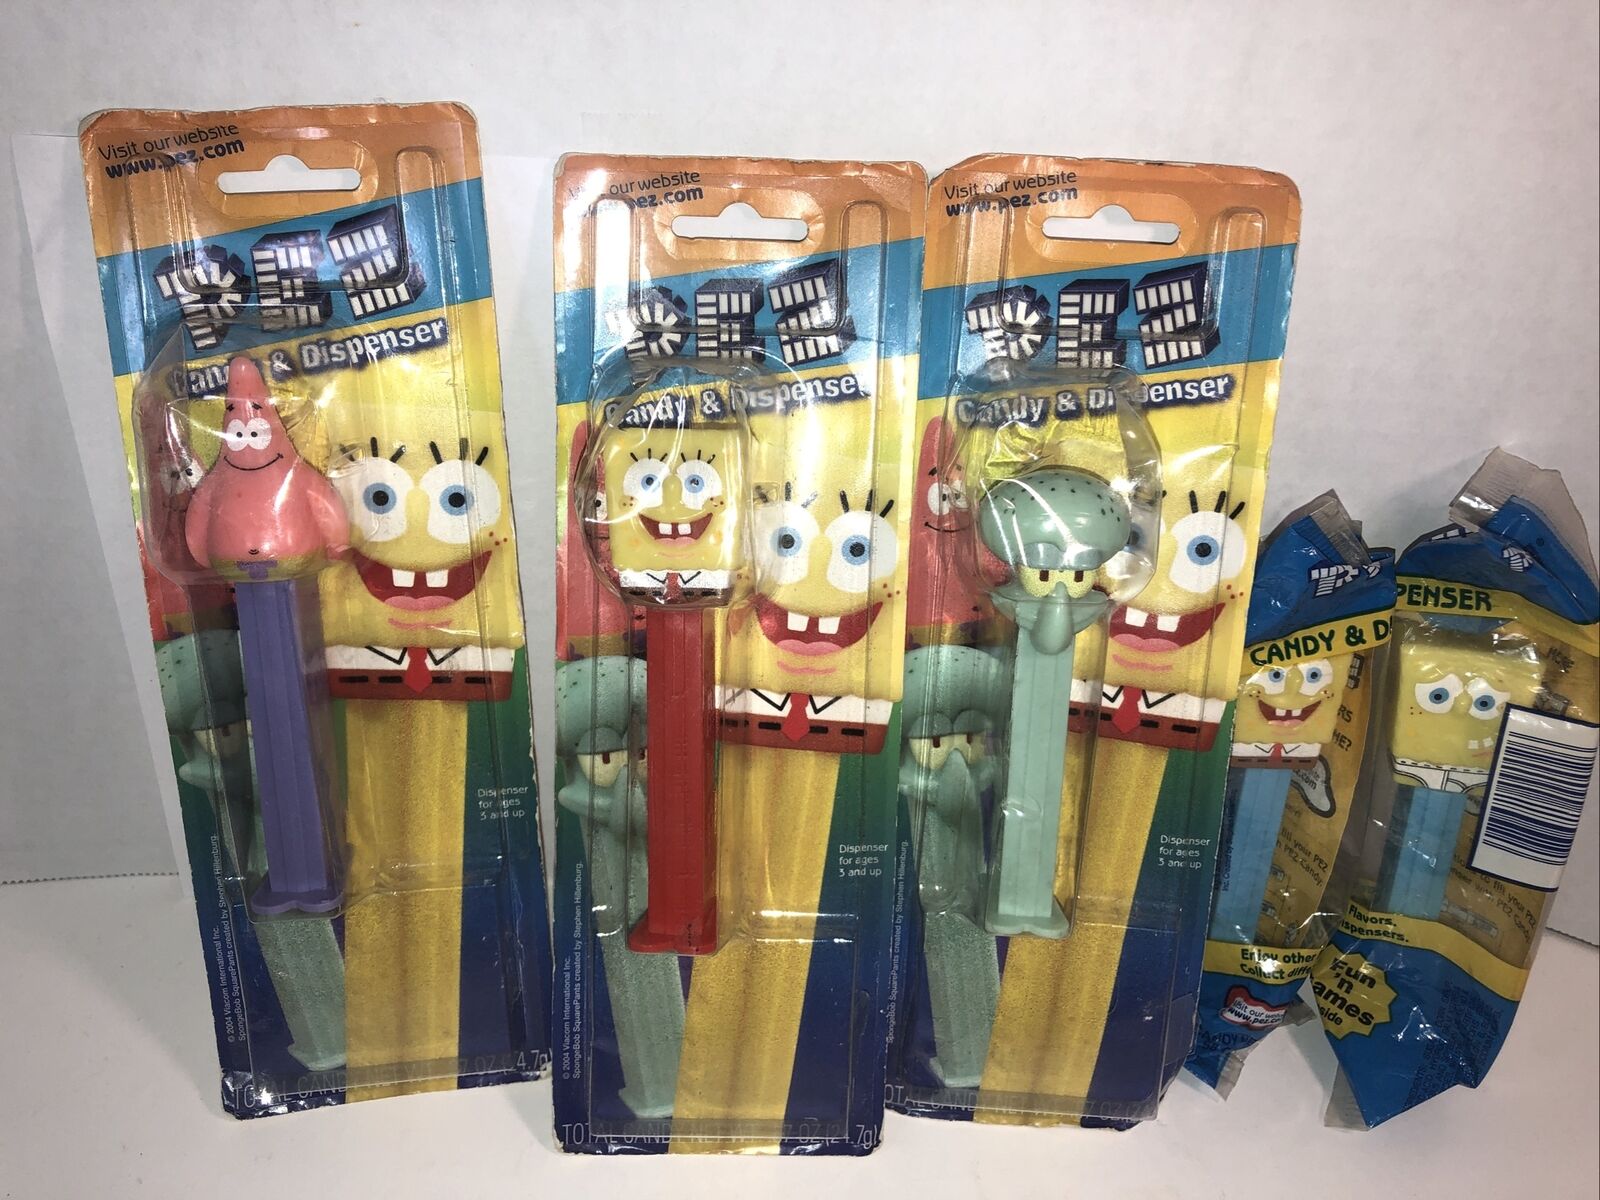 Spongebob Squarepants Pez Dispensers 5 Pack - New Other (Expired Candy Removed)